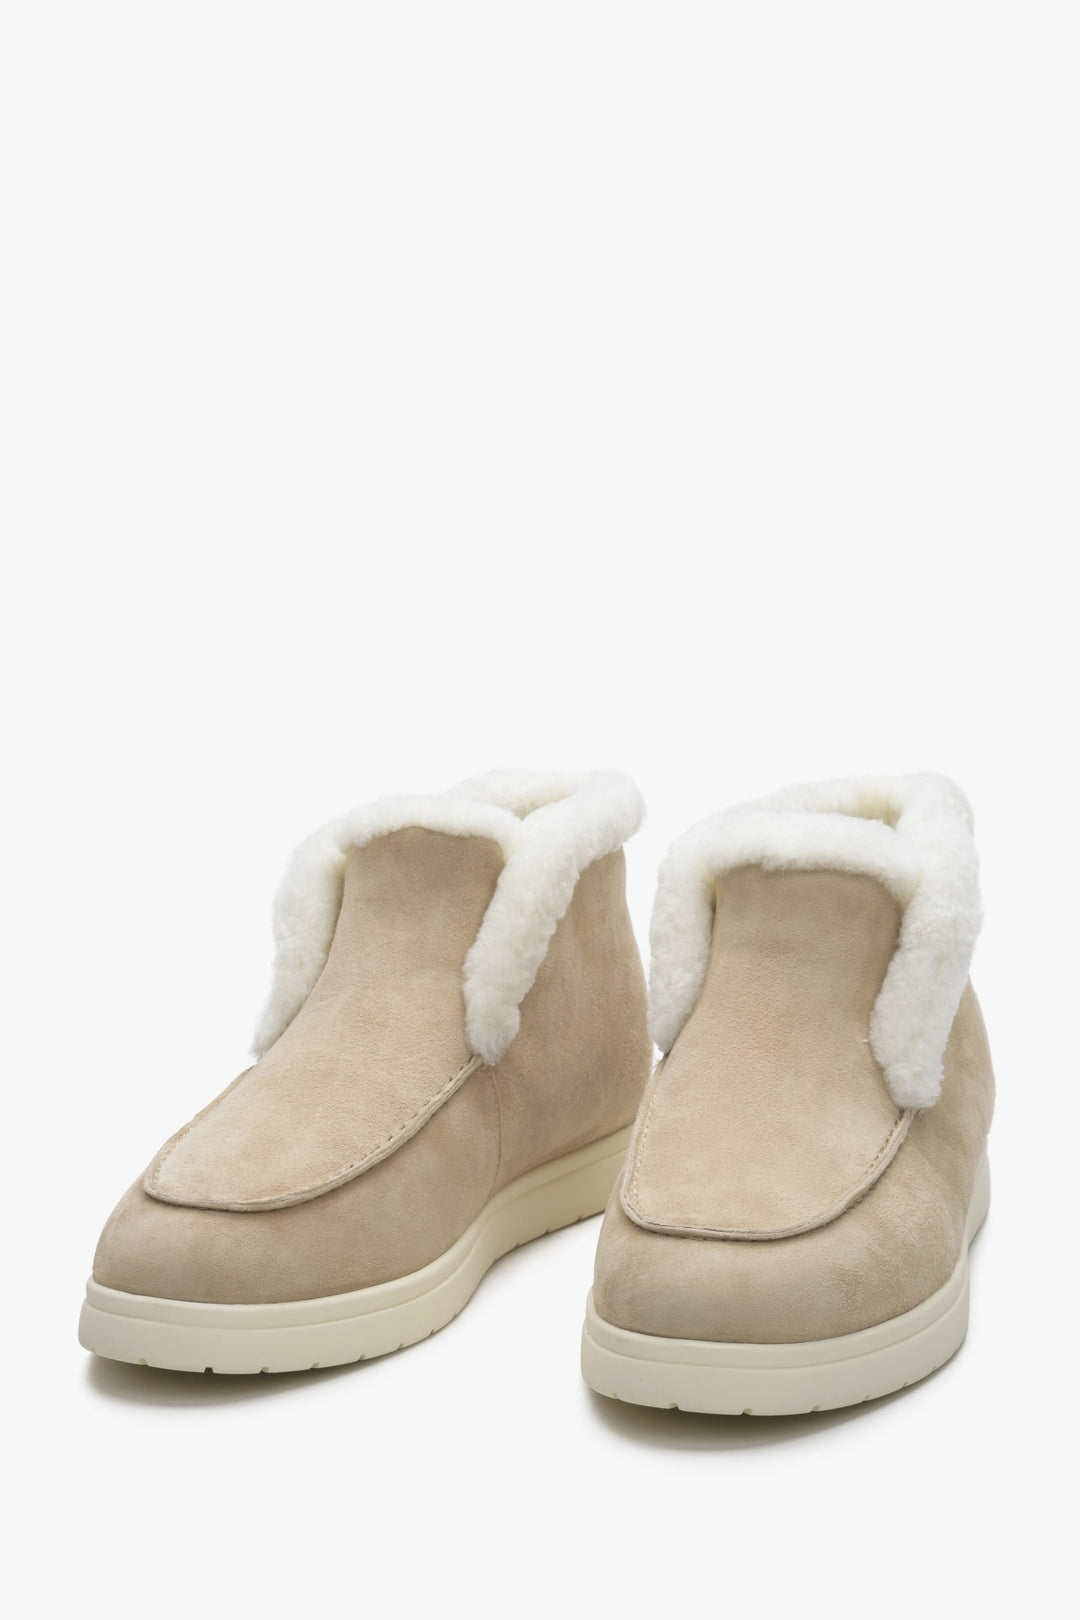 Low-top light beige slip on boots Estro with fur lining - presentation of the tip of the toes.